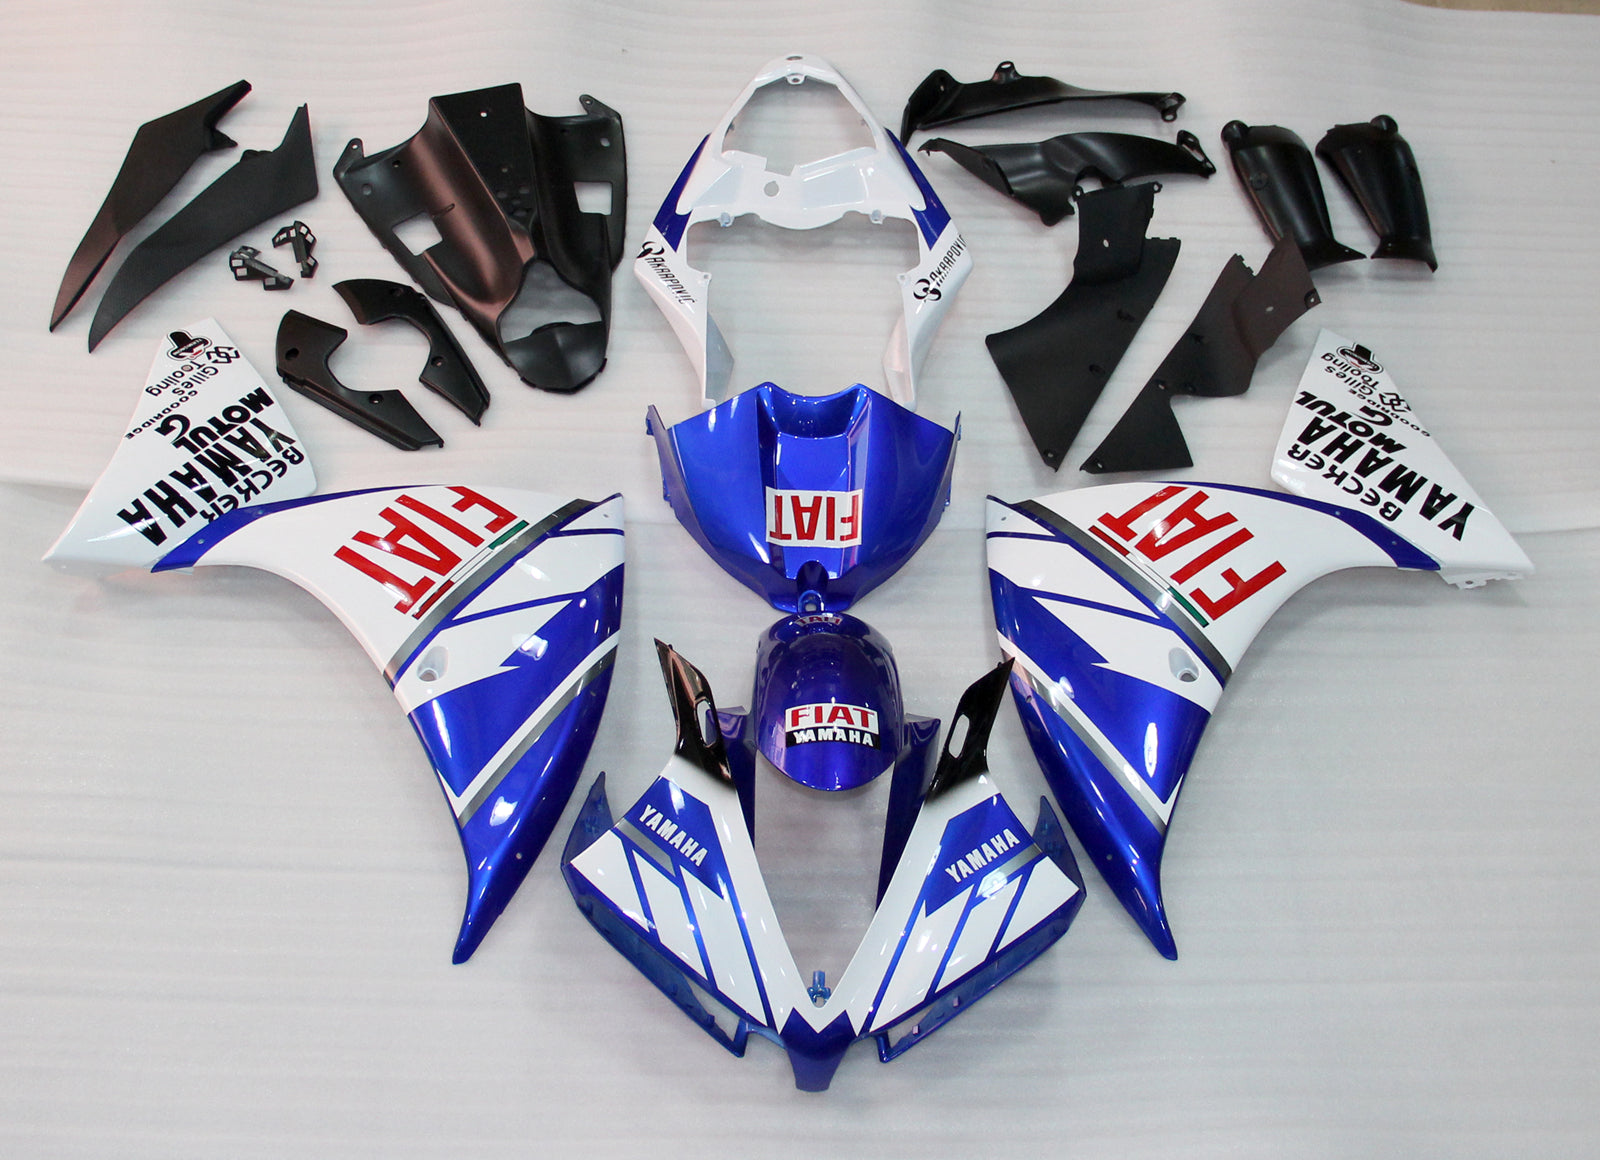 Generic Fit For Yamaha YZF 1000 R1 (2013-2014) Bodywork Fairing ABS Injection Molded Plastics Set 6 Style